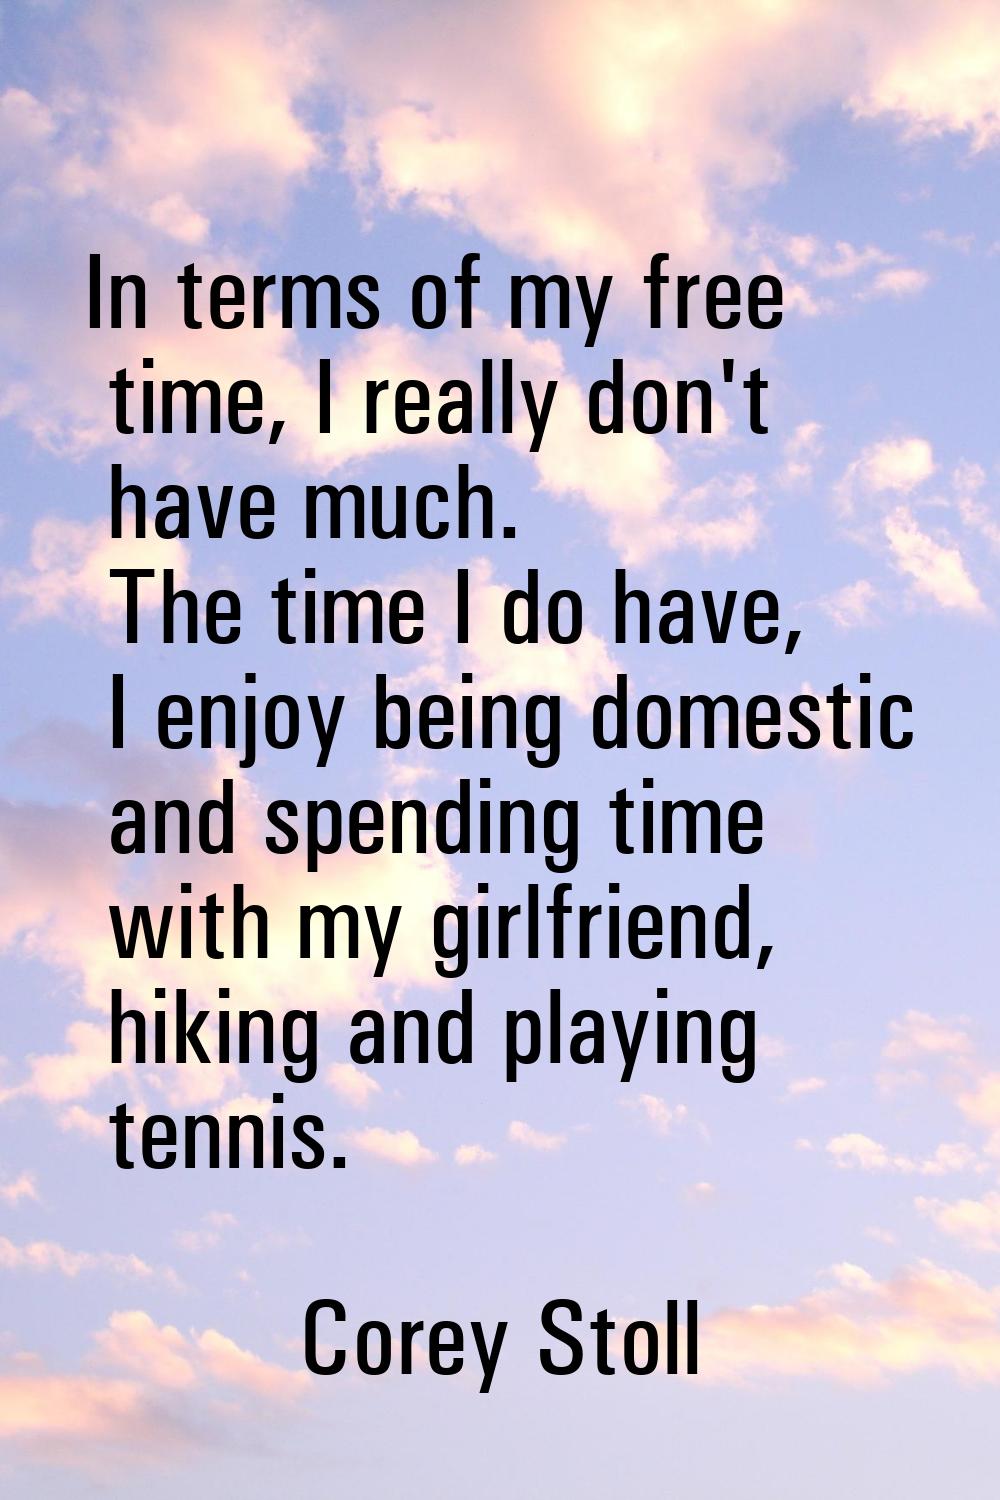 In terms of my free time, I really don't have much. The time I do have, I enjoy being domestic and 